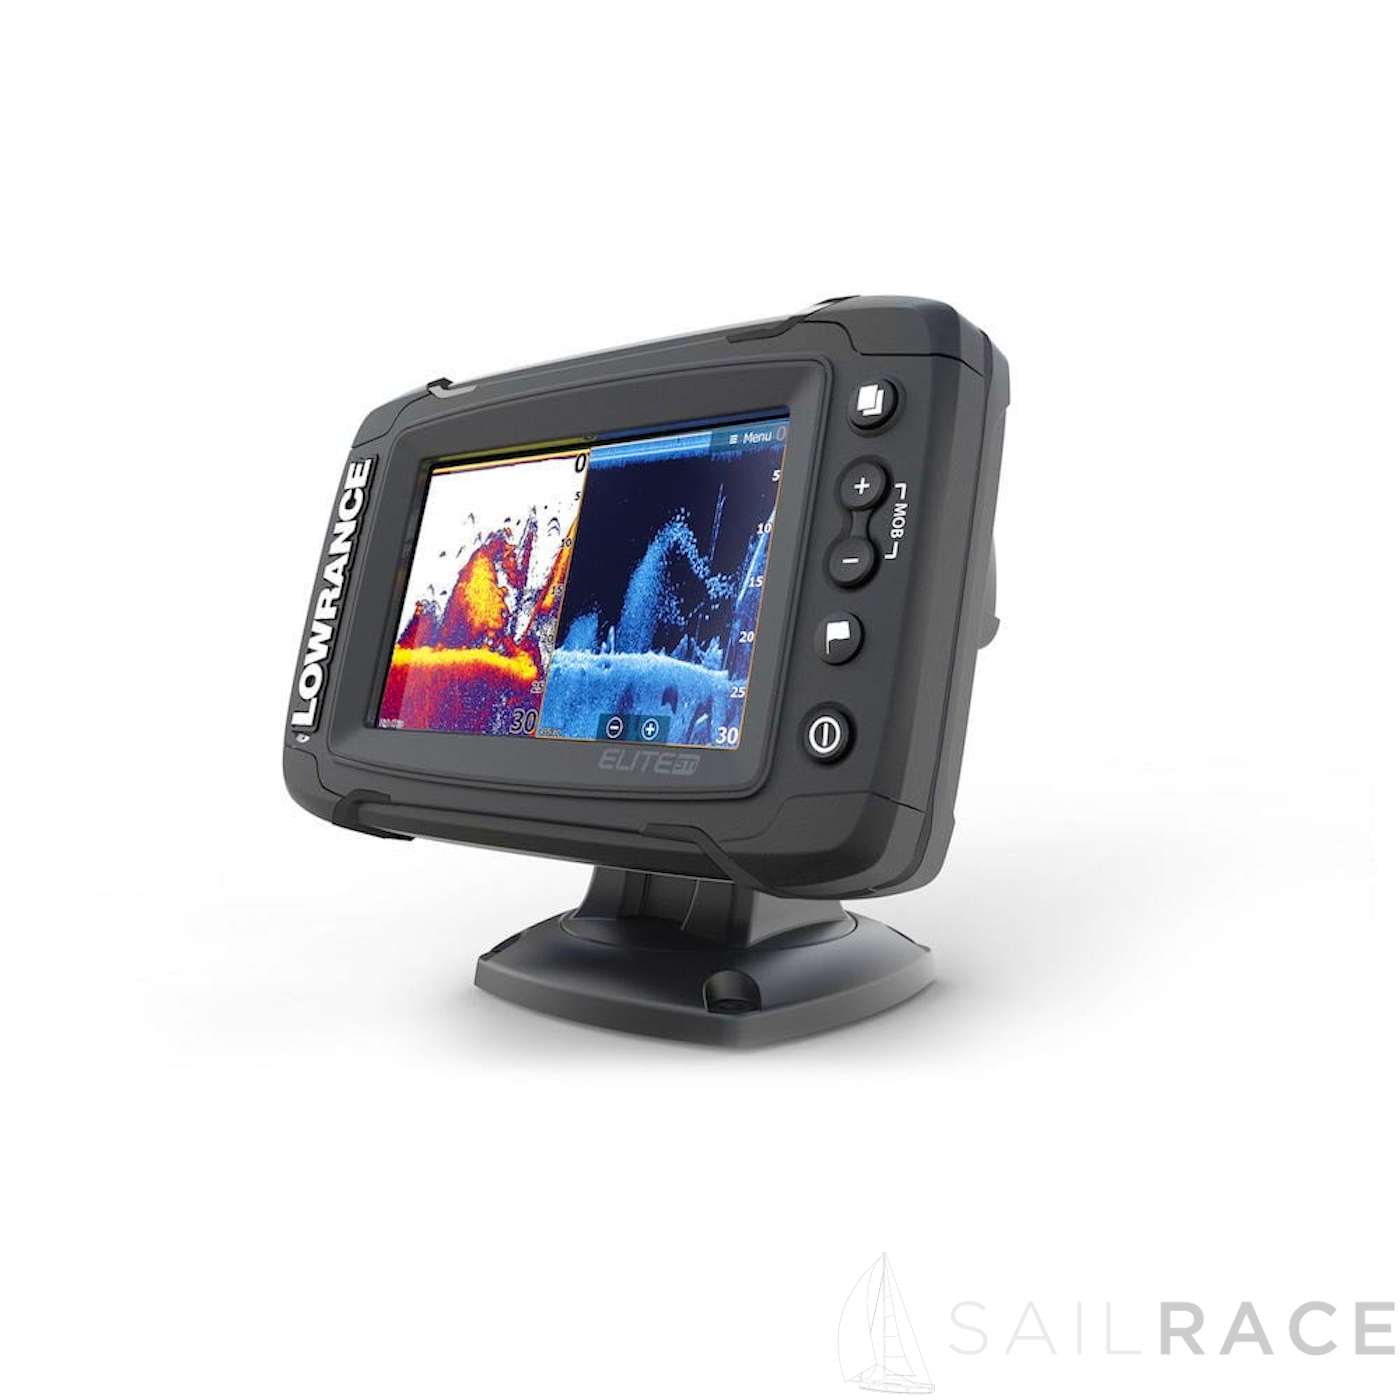 Lowrance Elite-5 Ti with Mid/High/TotalScan™ and North Europe Card - image 2